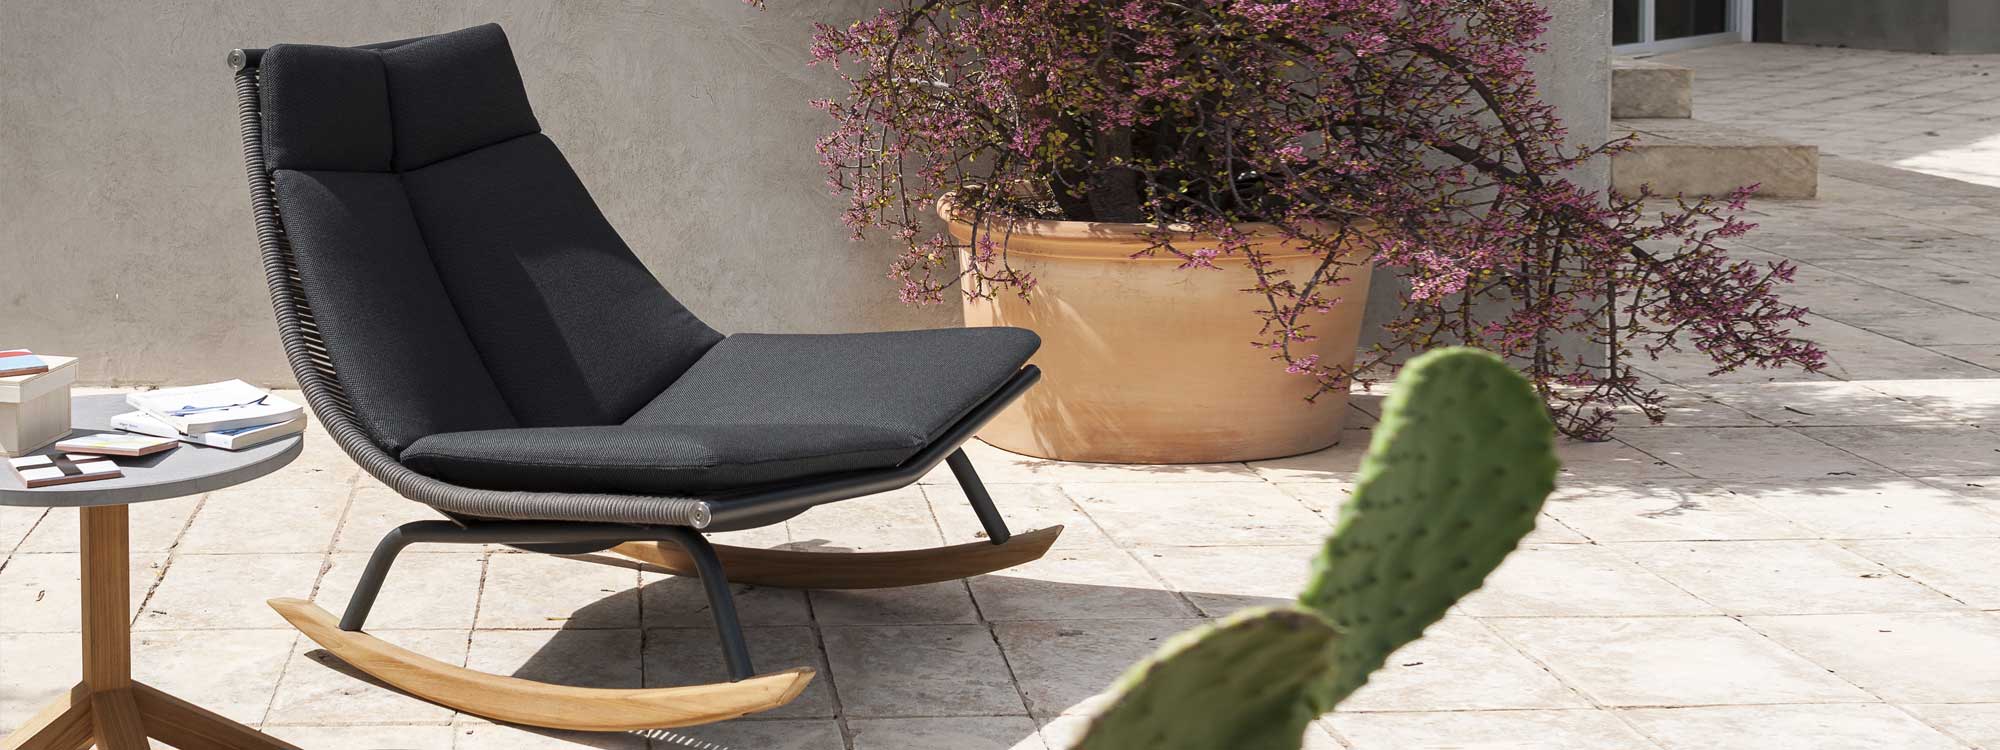 Laze garden rocking chair with Smoke-coloured frame & Grey cord, on sultry Italian terrace